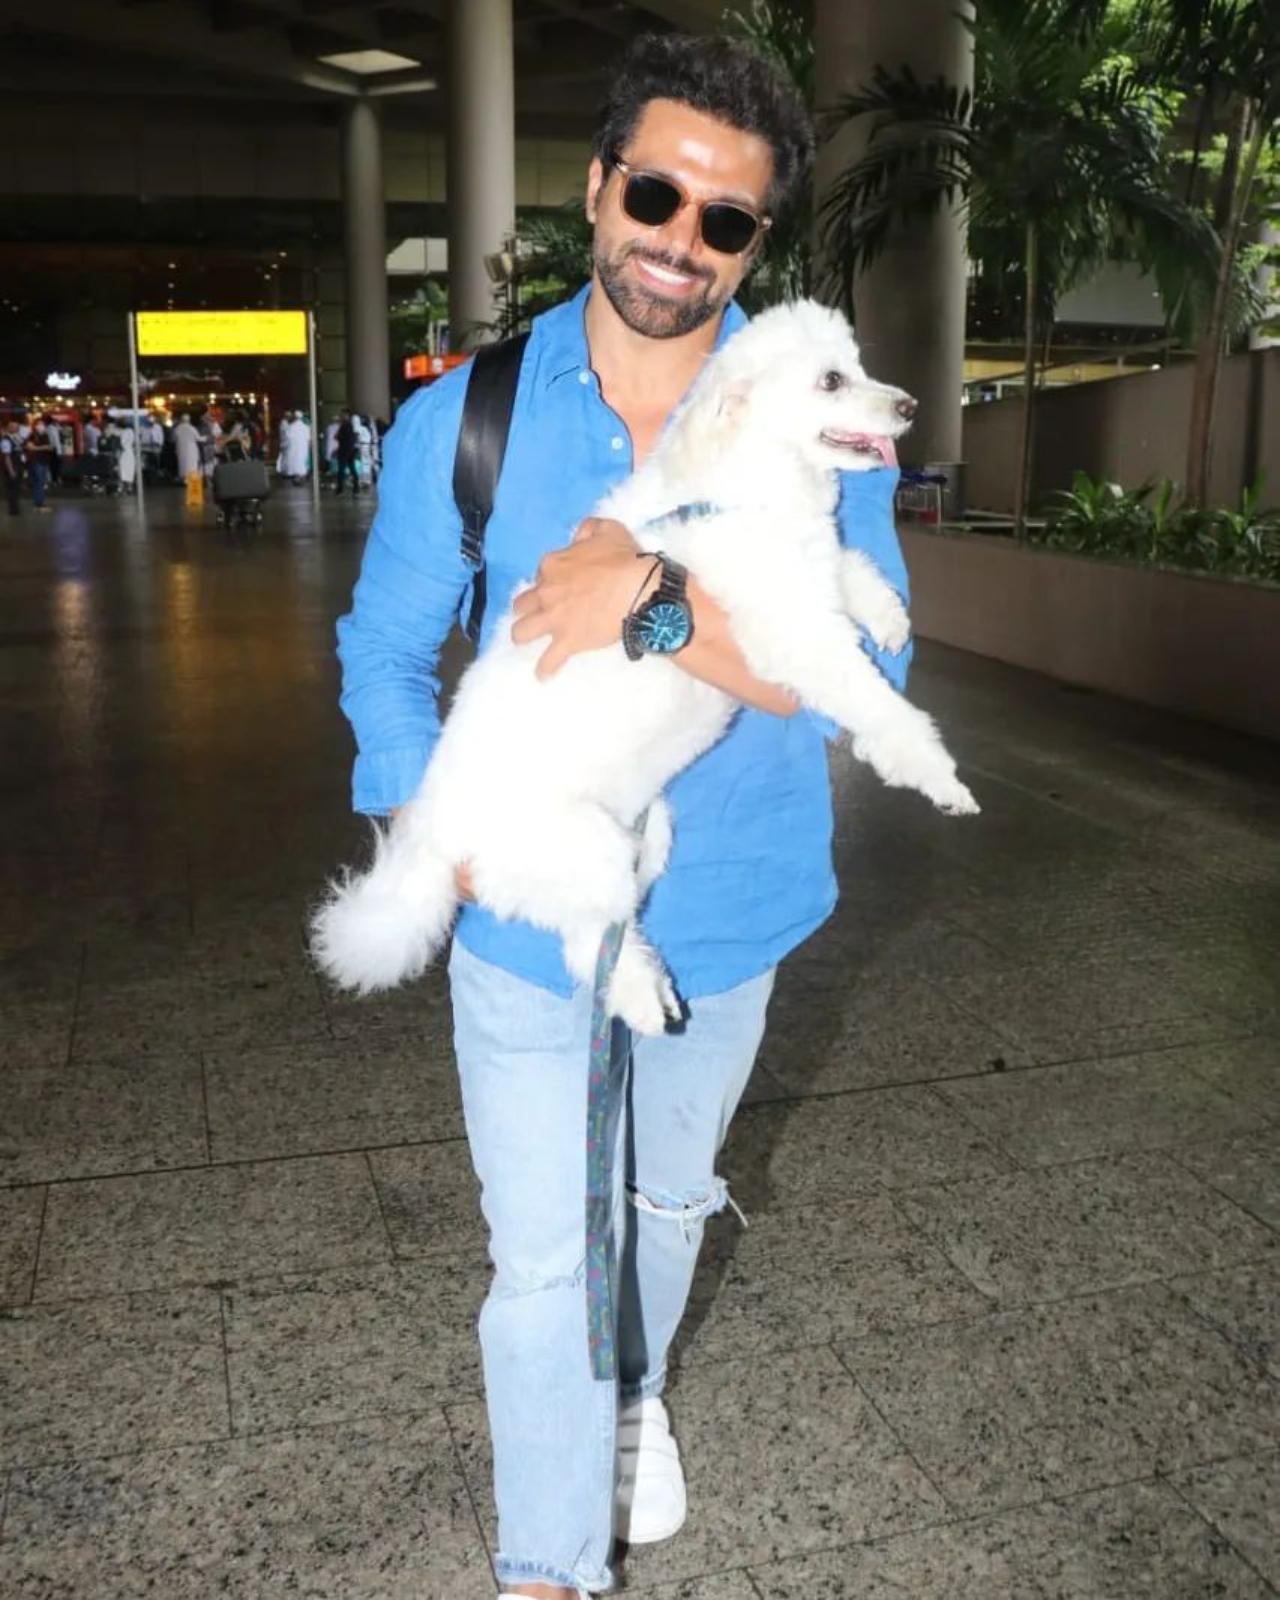 Rithvik Dhanjani
Rithvik Dhanjani, is an ardent animal lover and a proud pet parent of two dogs. His special affection is reserved for his pets Eve and Murphey, who have been a cherished part of his family for quite some time now